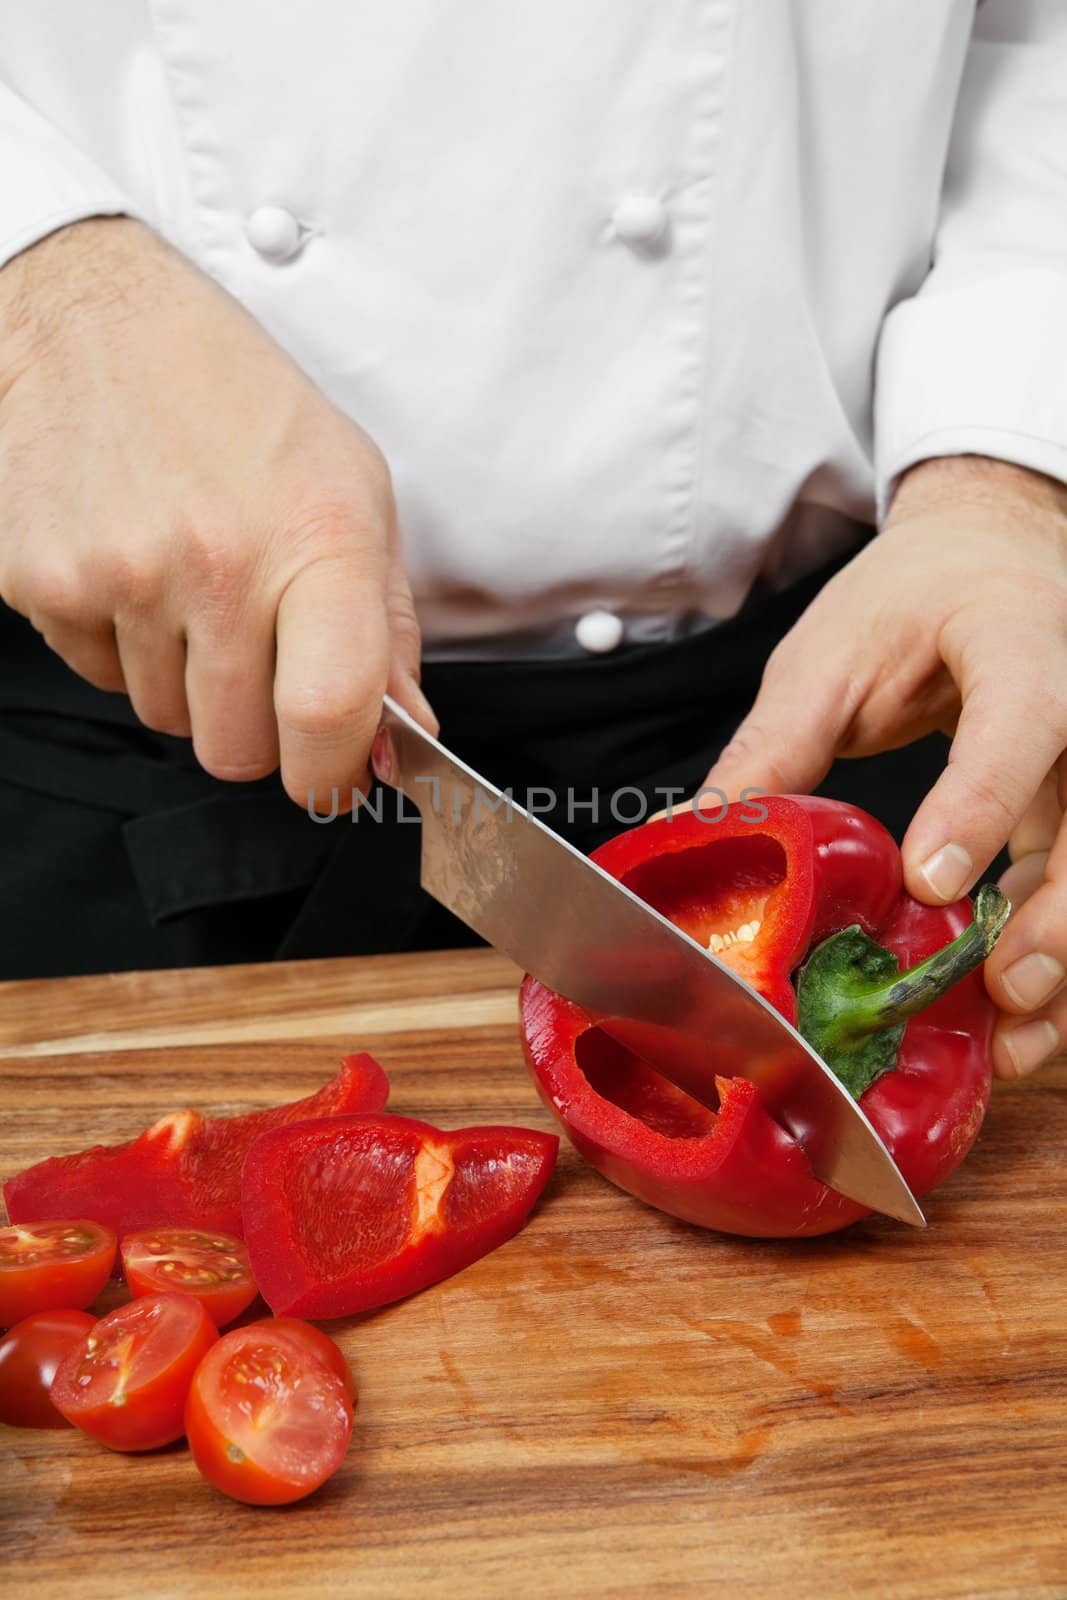 Photo of a chef chopping a red bell pepper on a wooden cutting board.